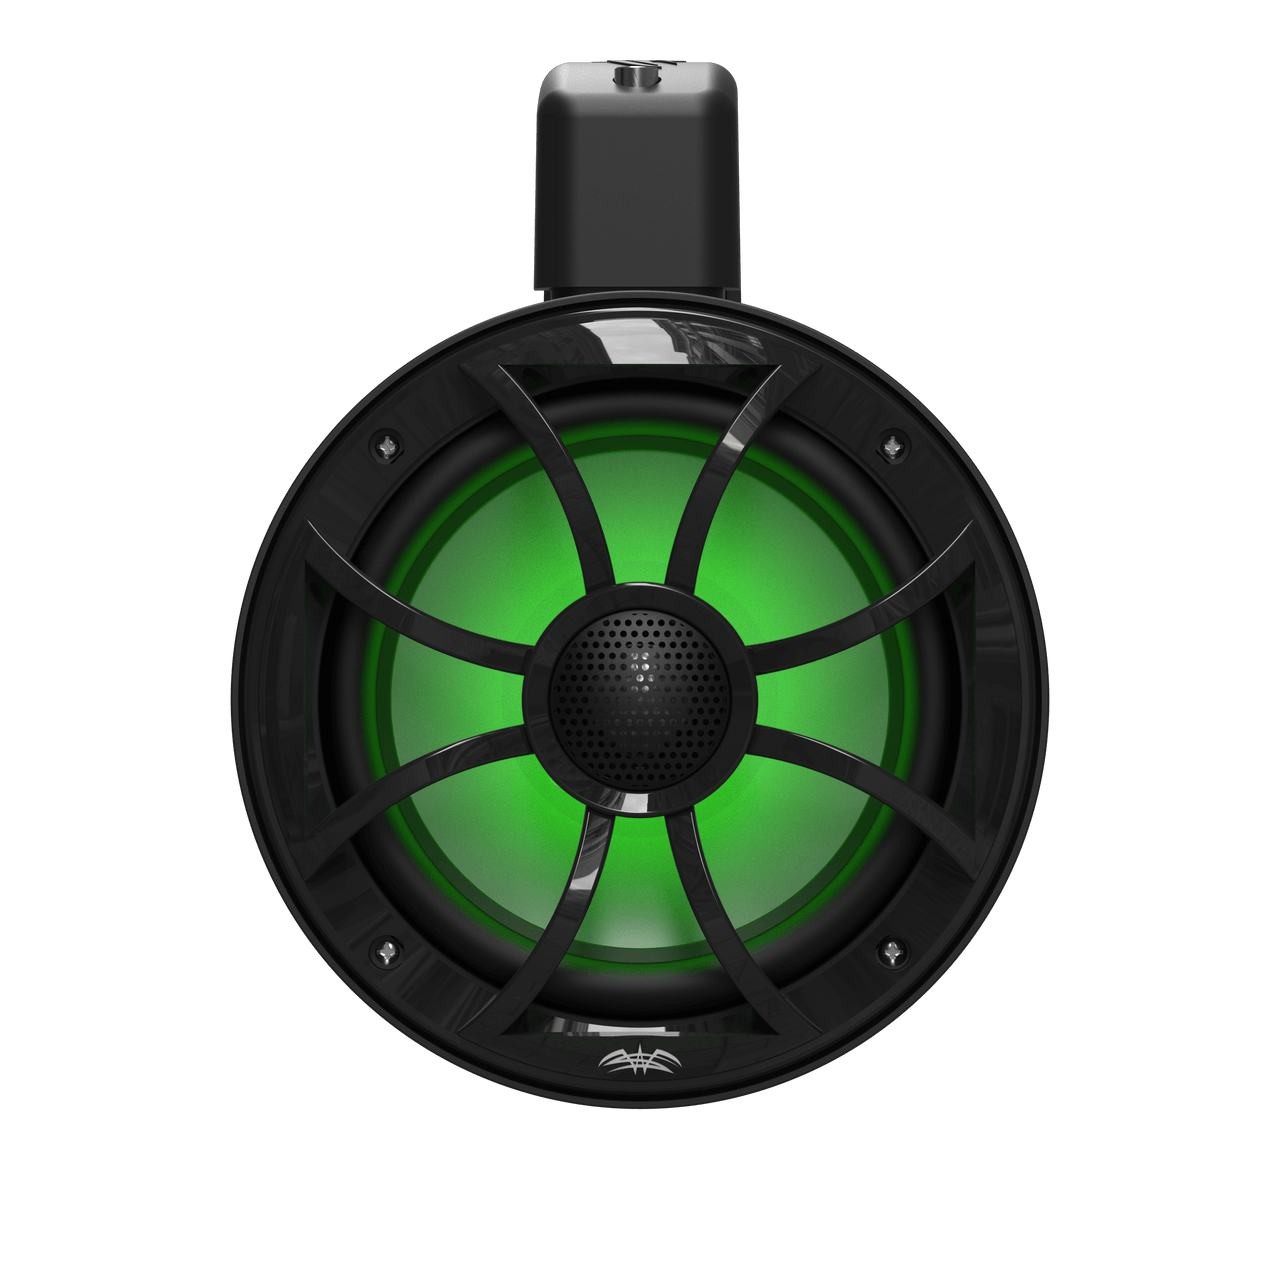 Wet Sounds Wake Tower Speakers Wet Sounds | RECON 6 POD-BG 6.5 Inch Coaxial Wakeboard Tower Speakers